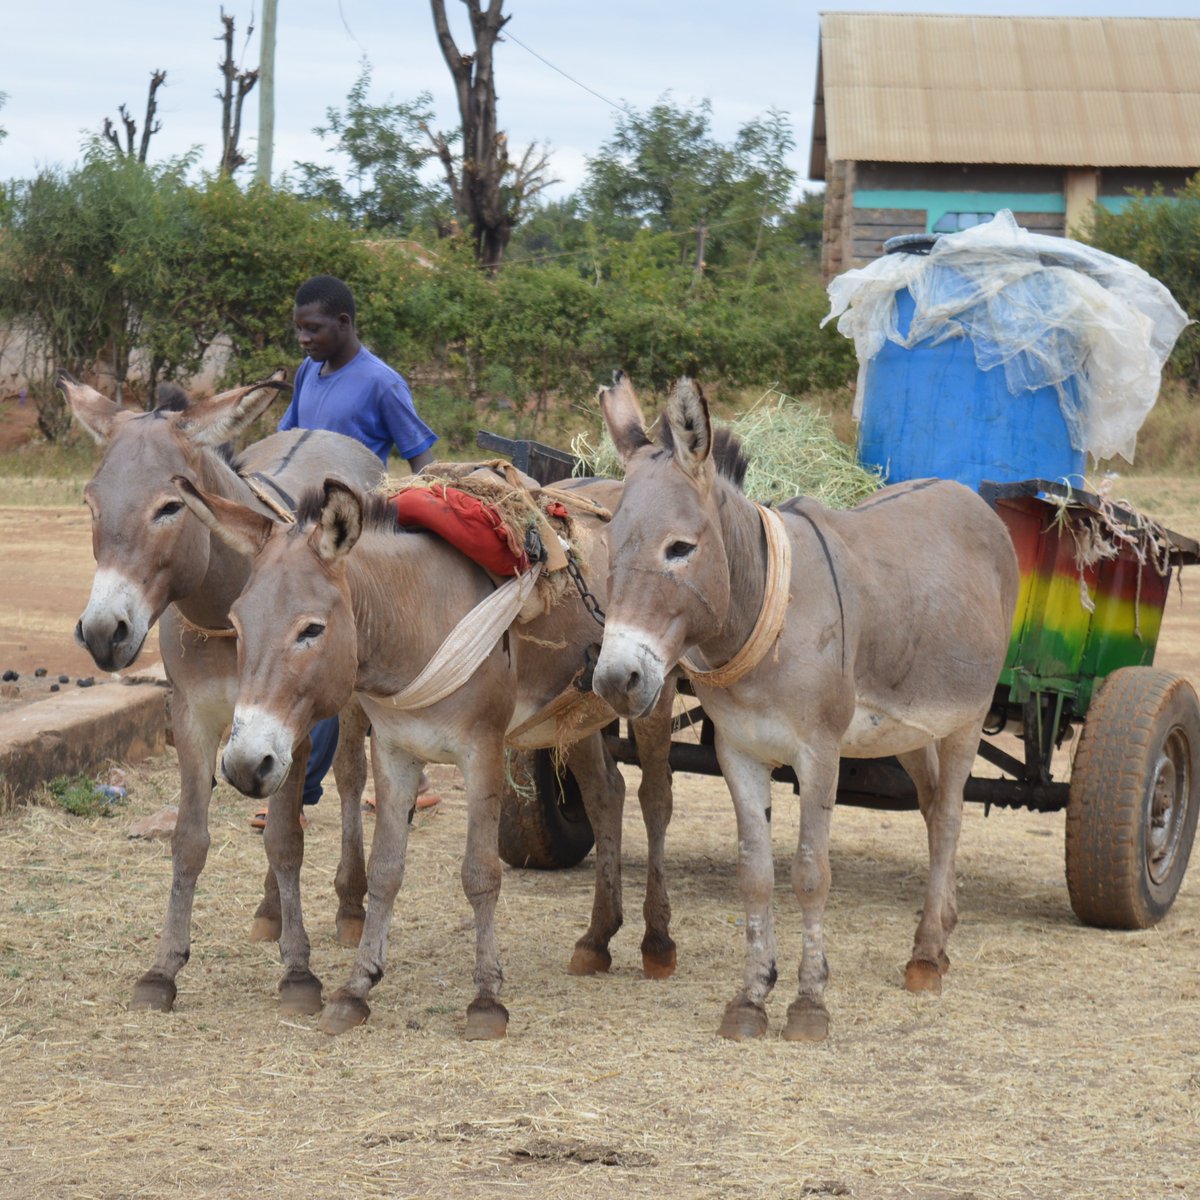 In Peri-Urban areas, water is an essential commodity for both domestic and commercial use. Donkeys play a very crucial role in water transportation ensuring these social and economic needs are met. #SDG6 #accesstocleanwater #cleanwaterandsanitation #CleanWaterAndSanitation